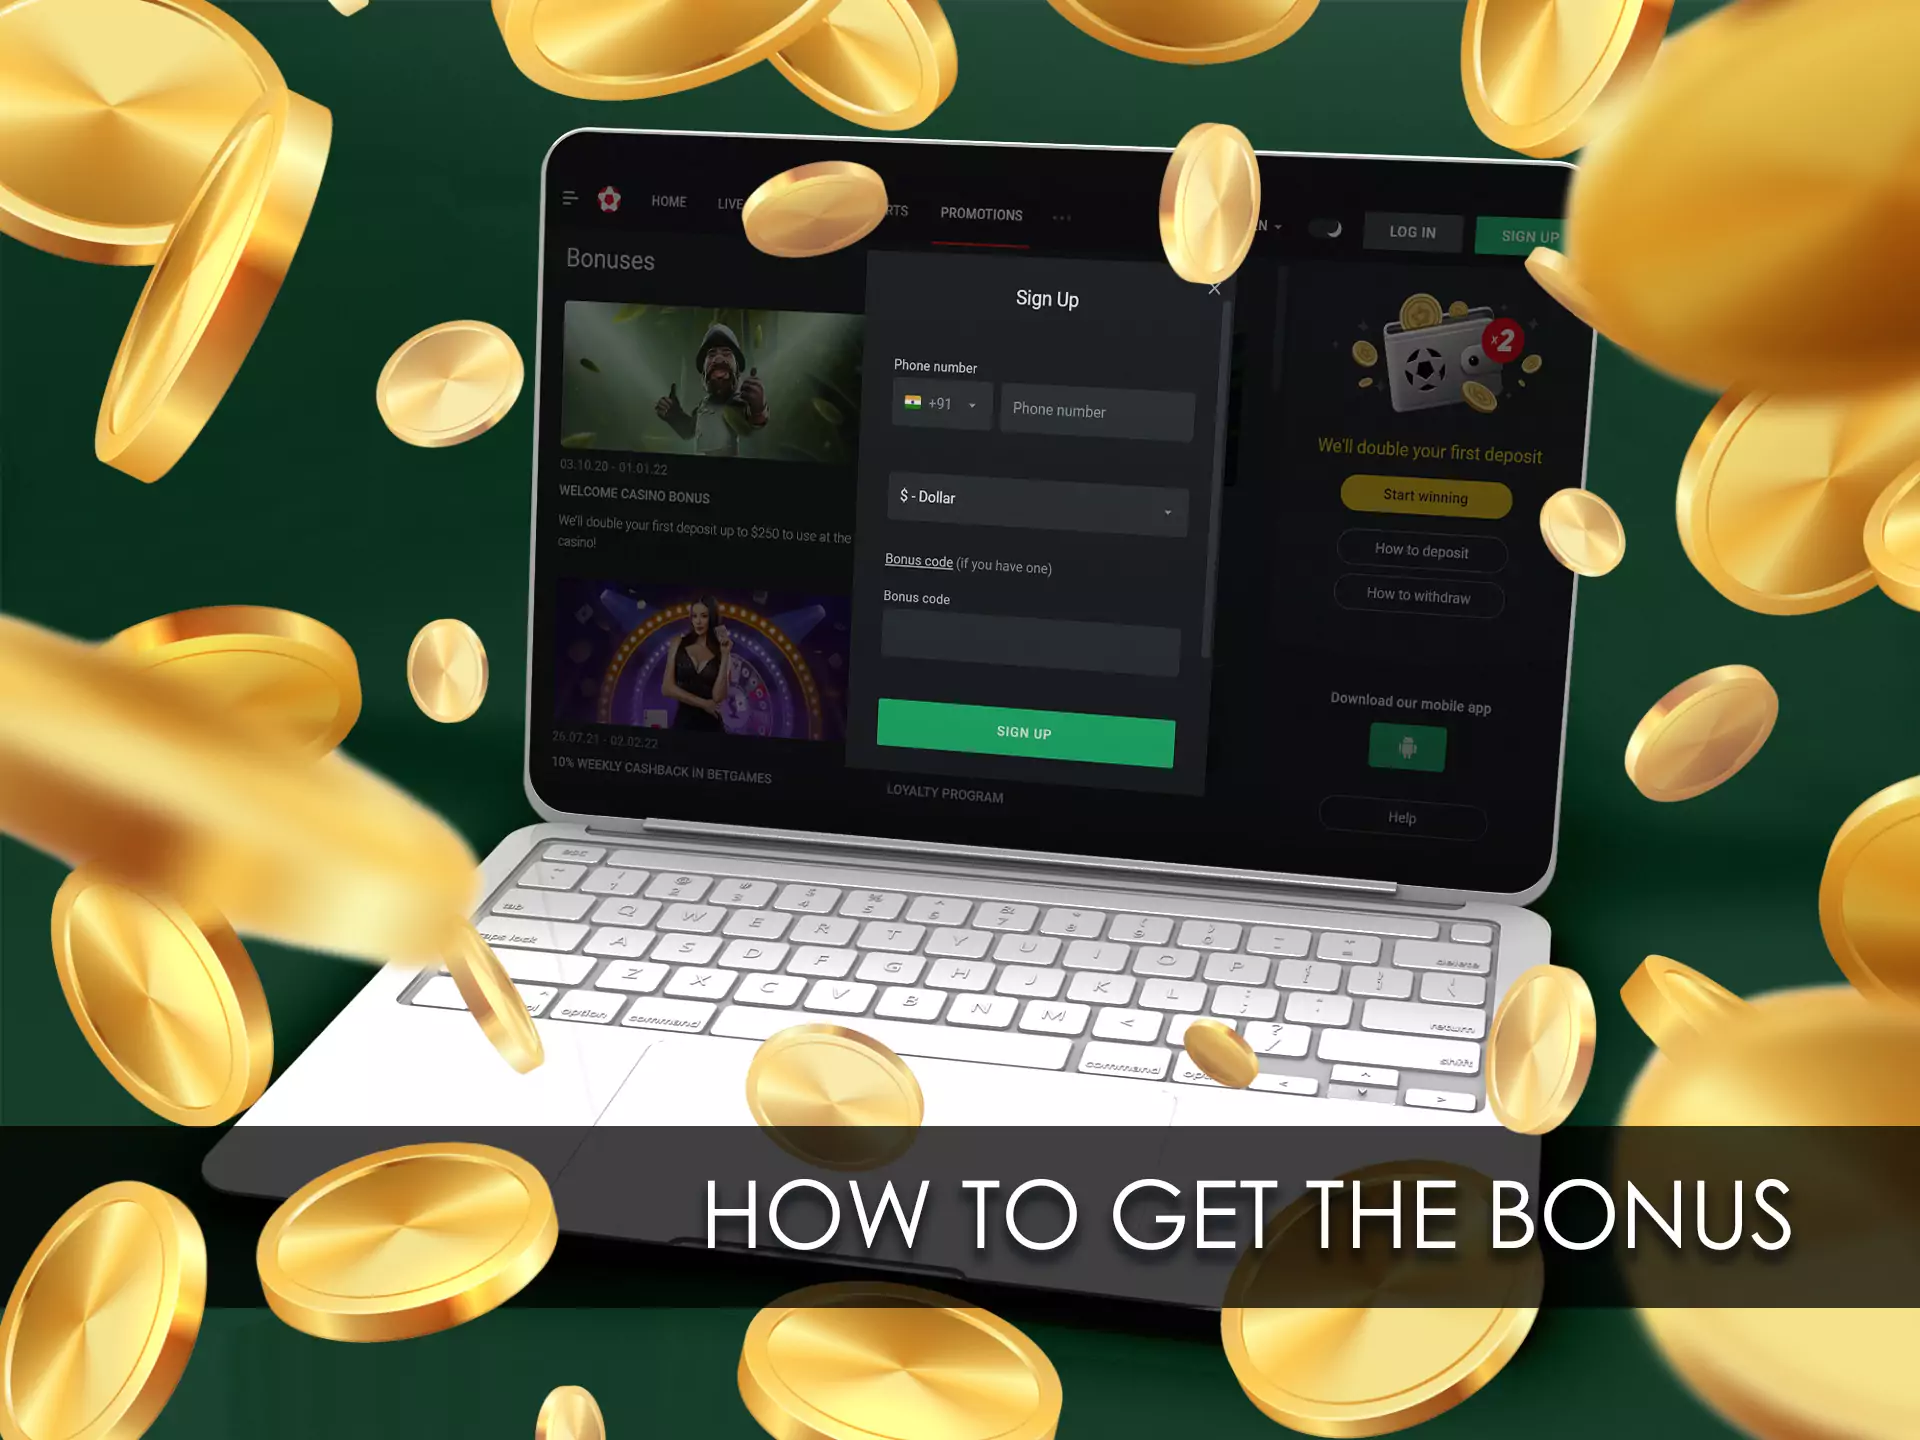 To claim the welcome bonus you have to start registration.